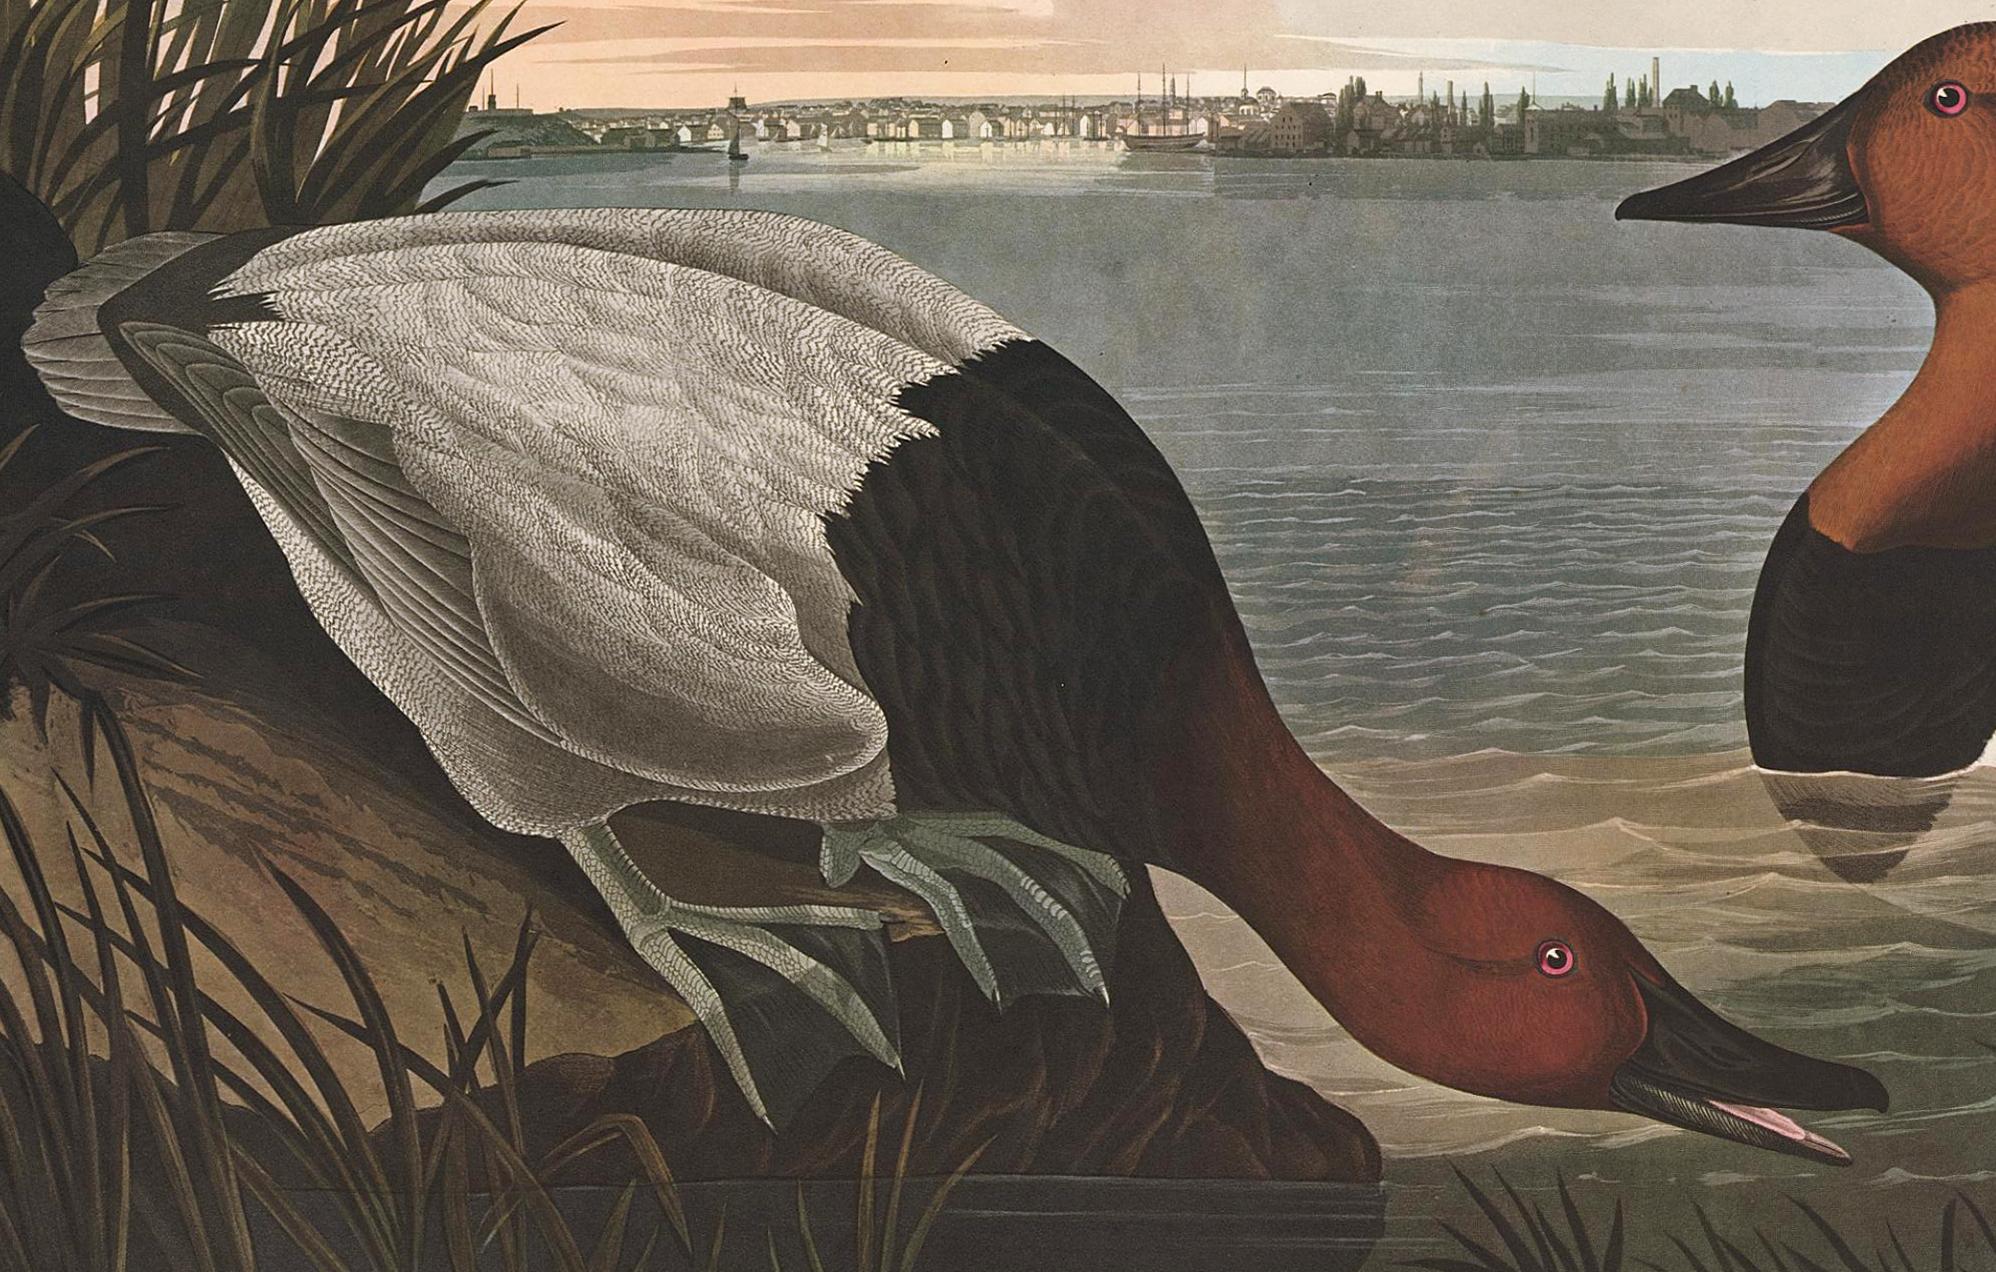 Plate CCCI, Canvas Backed Duck, posthumous reproduction after John James Audubon from The Birds of America, the Amsterdam Edition, printed in Amsterdam, 1971-73. Original multicolored photo-offset print. 